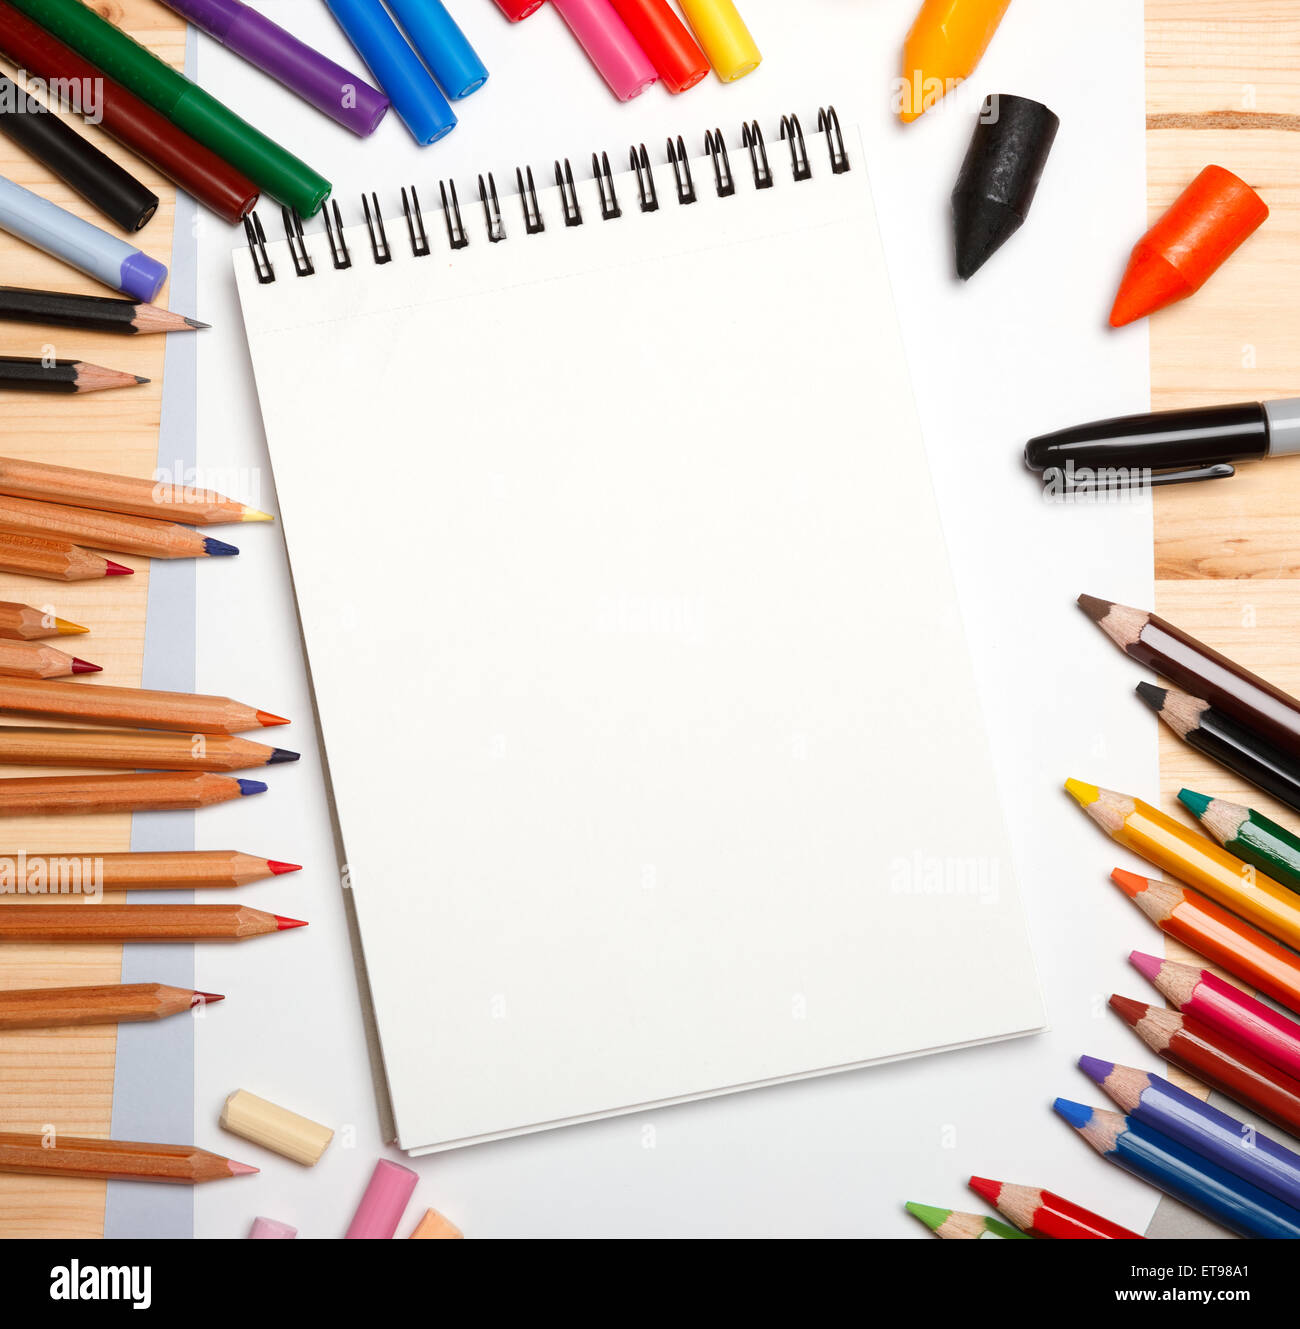 Drawing Materials Stock Photo, Picture and Royalty Free Image